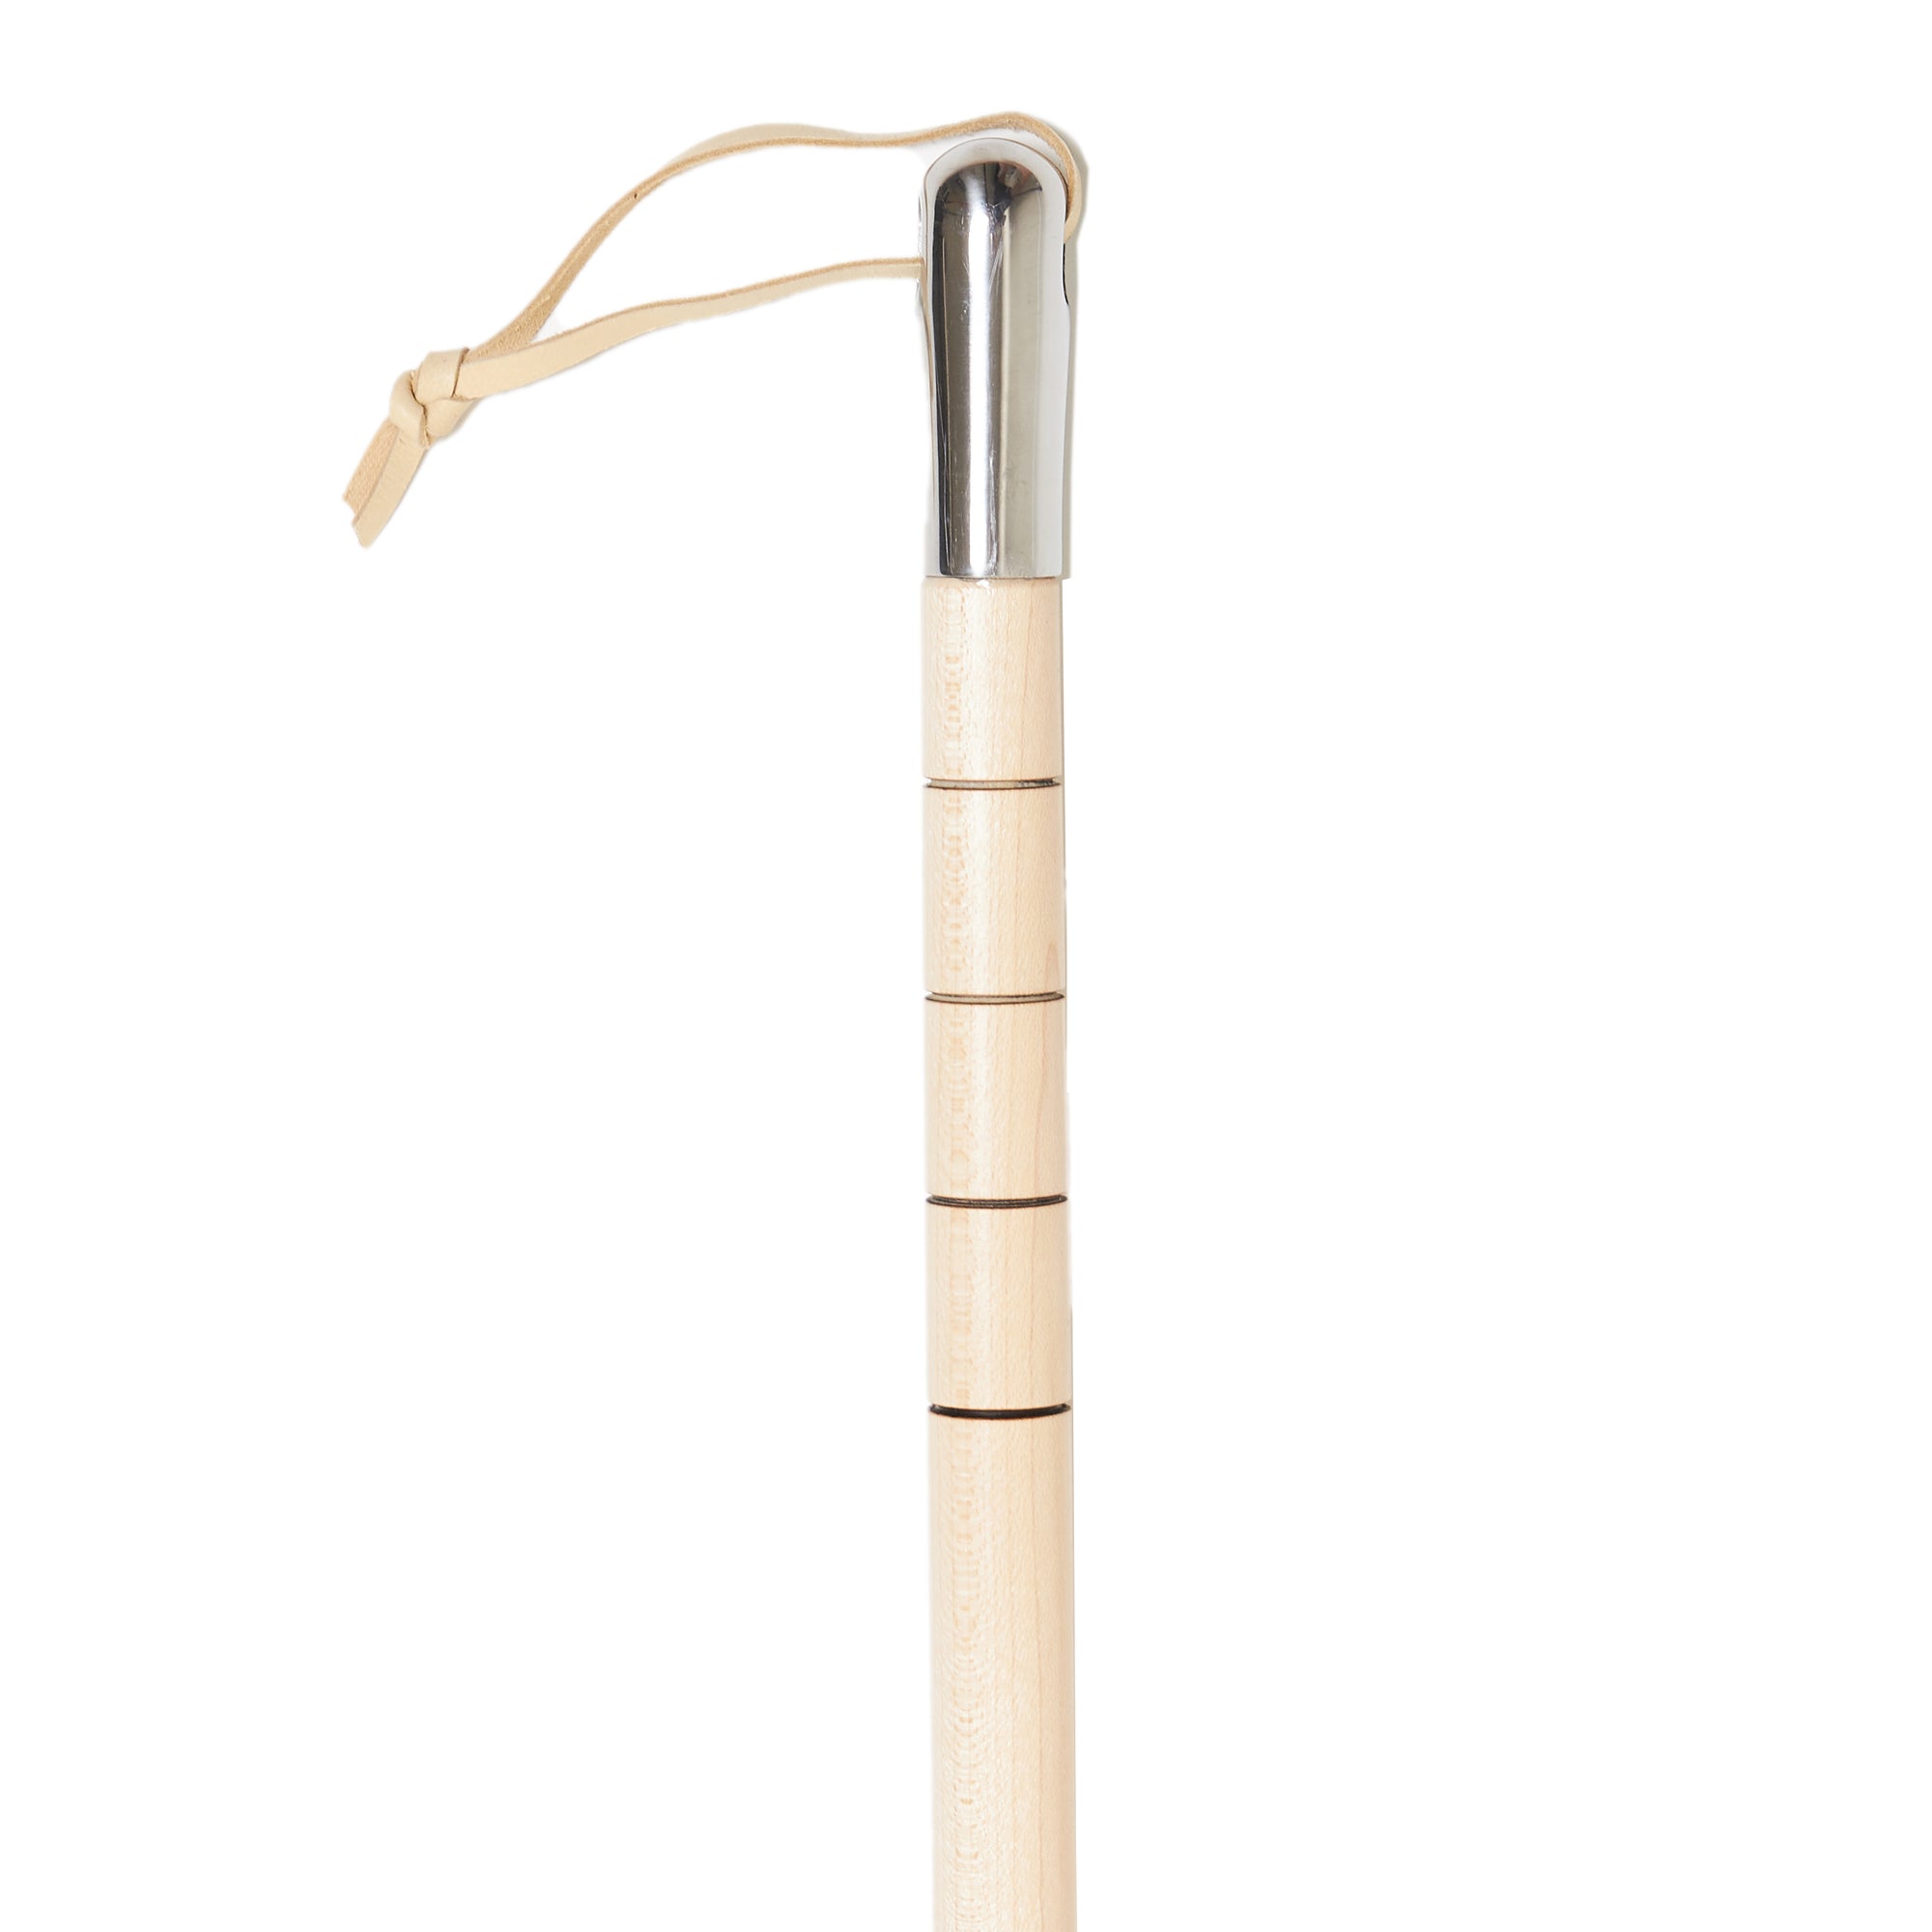 A KirbyAllison.com Maple Full-Length Shoe Horn made of hardwoods with a glossy finish.